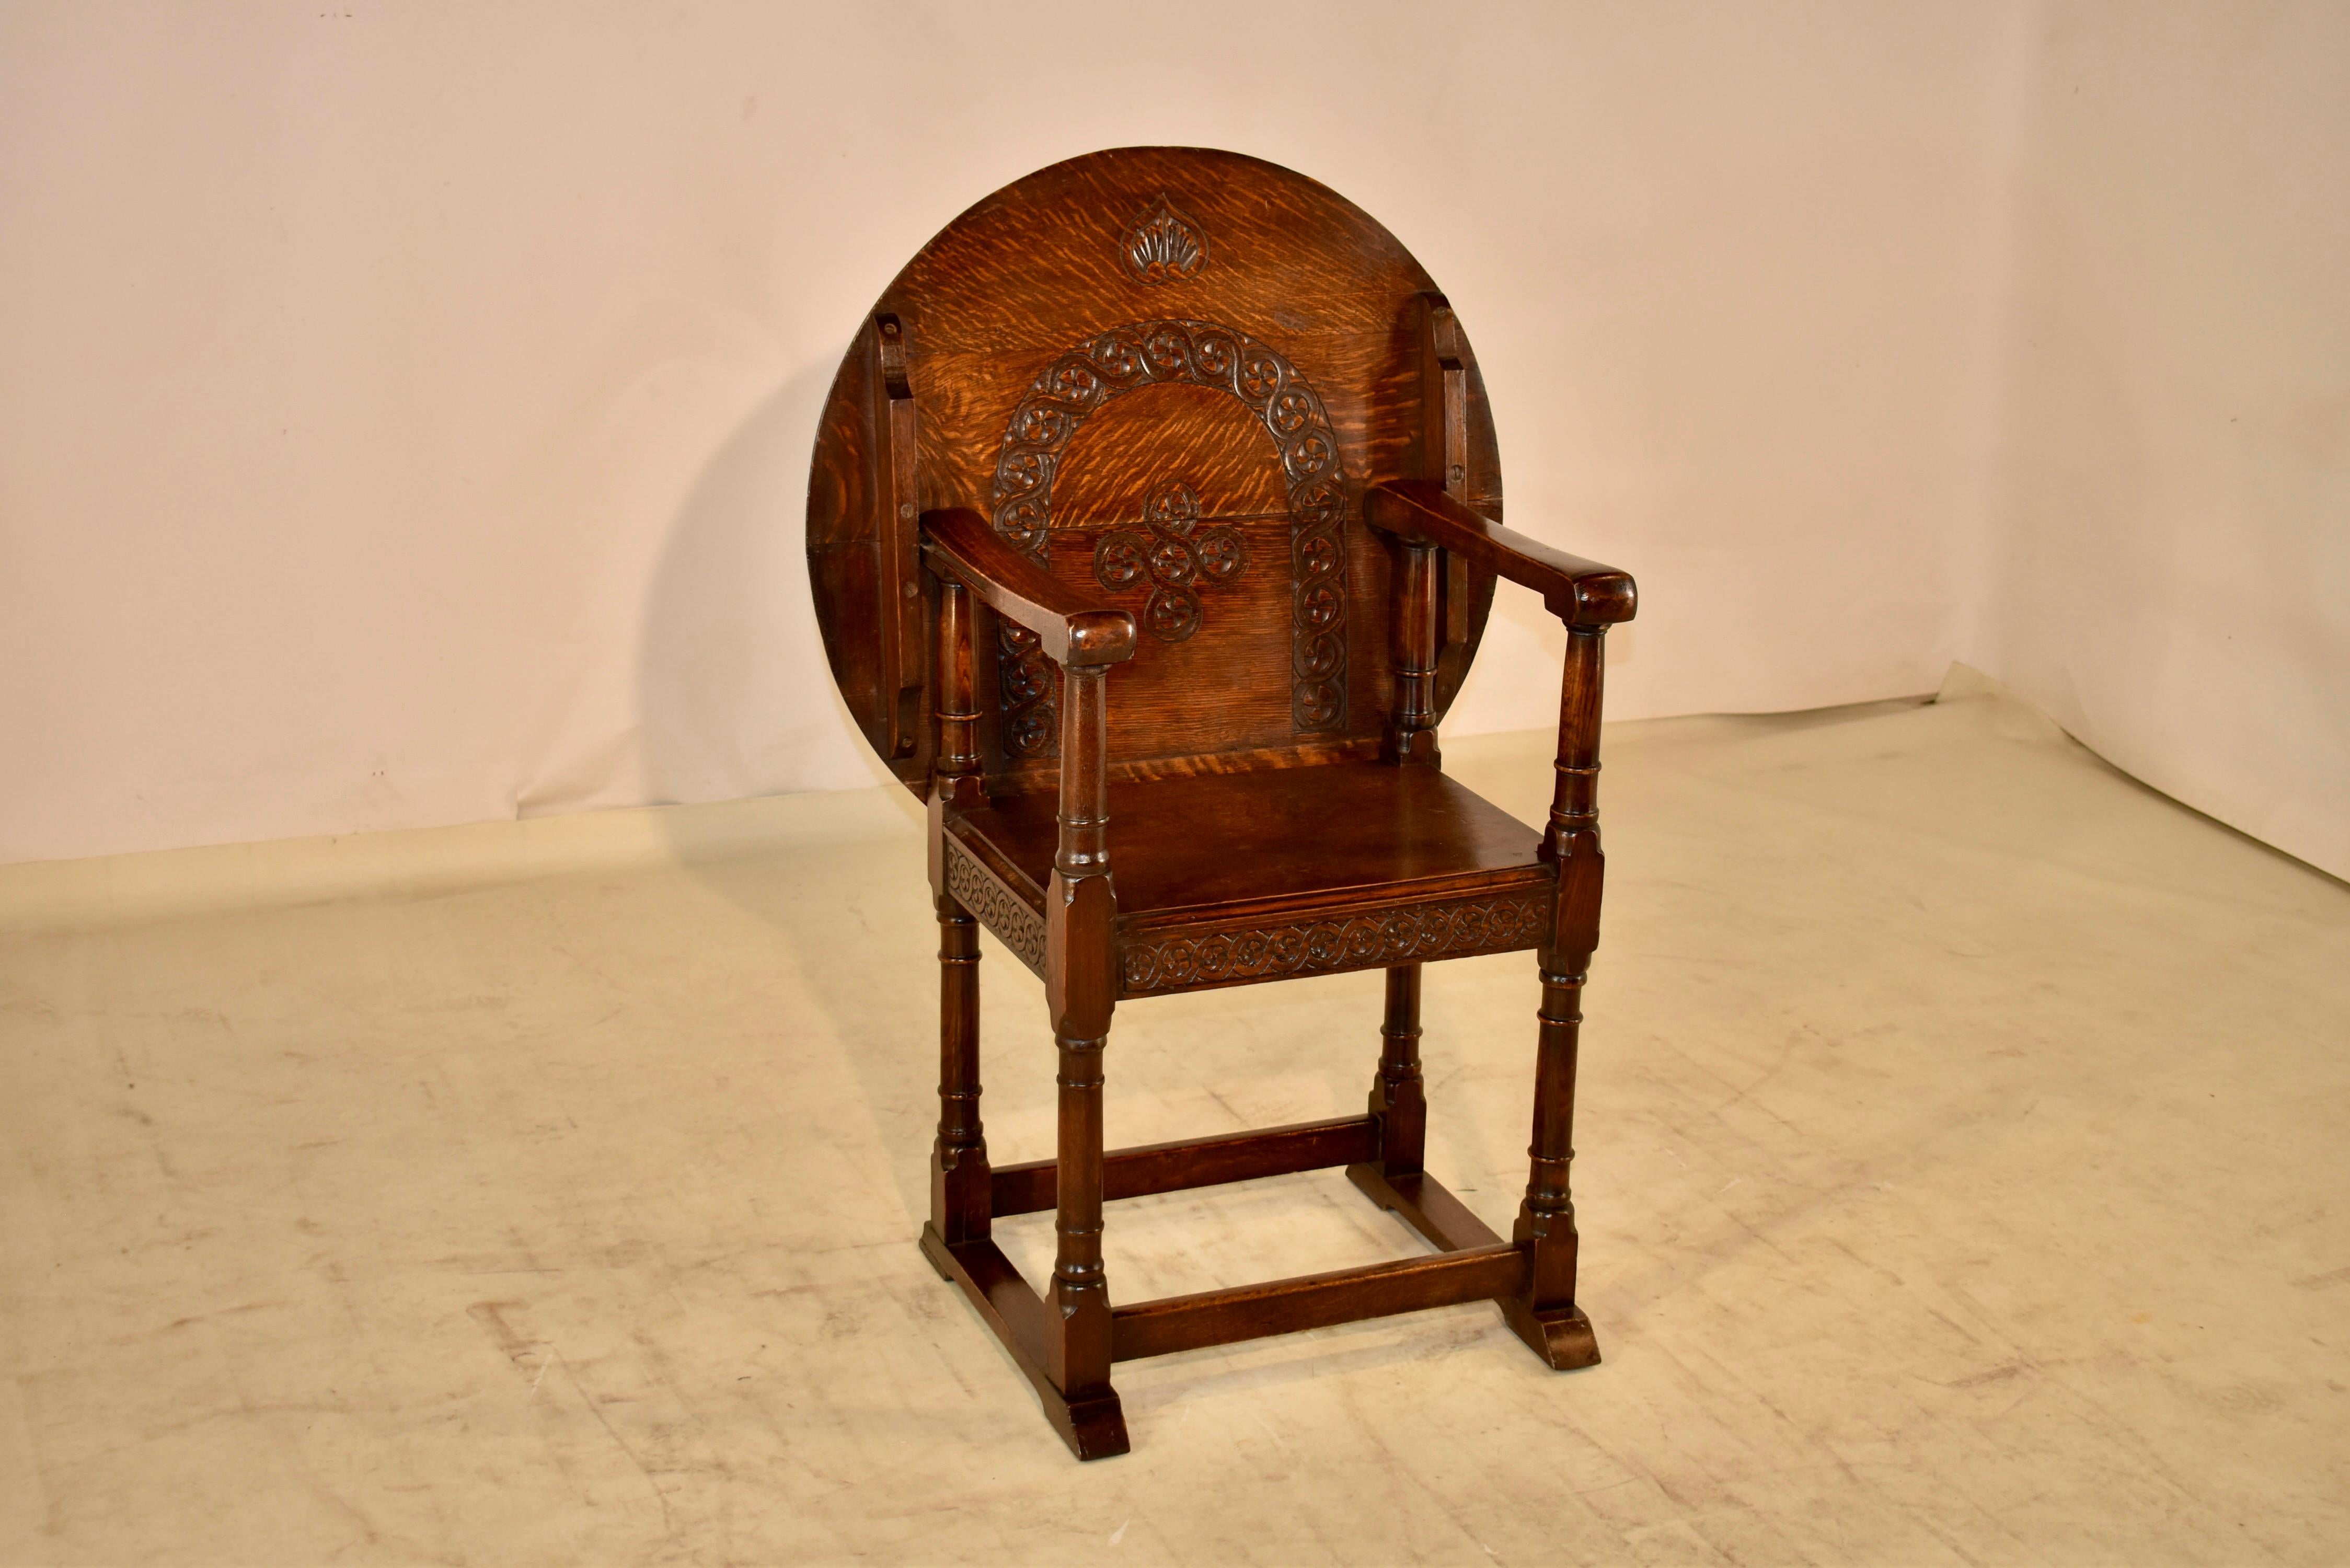 Late 19th century oak Monk's seat from England. When the top is up, it can be used for comfortable seating. The seat back has hand carved details for added interest. The seat can then be converted easily into a table top by sliding the back of the